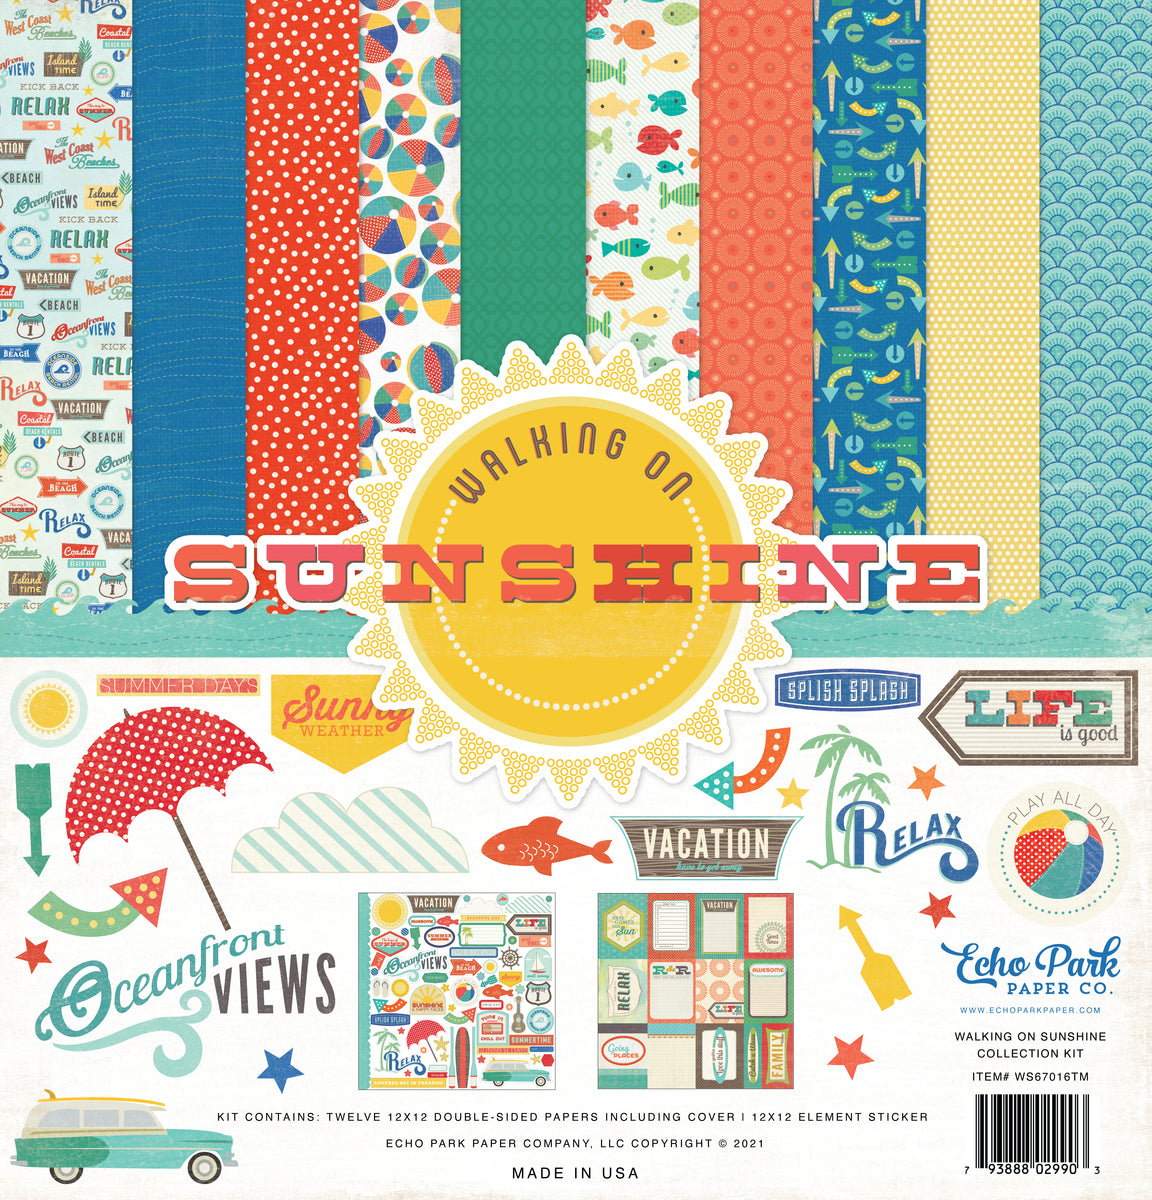 Walking On Sunshine - 12x12 collection kit with summer theme by Echo Park Paper